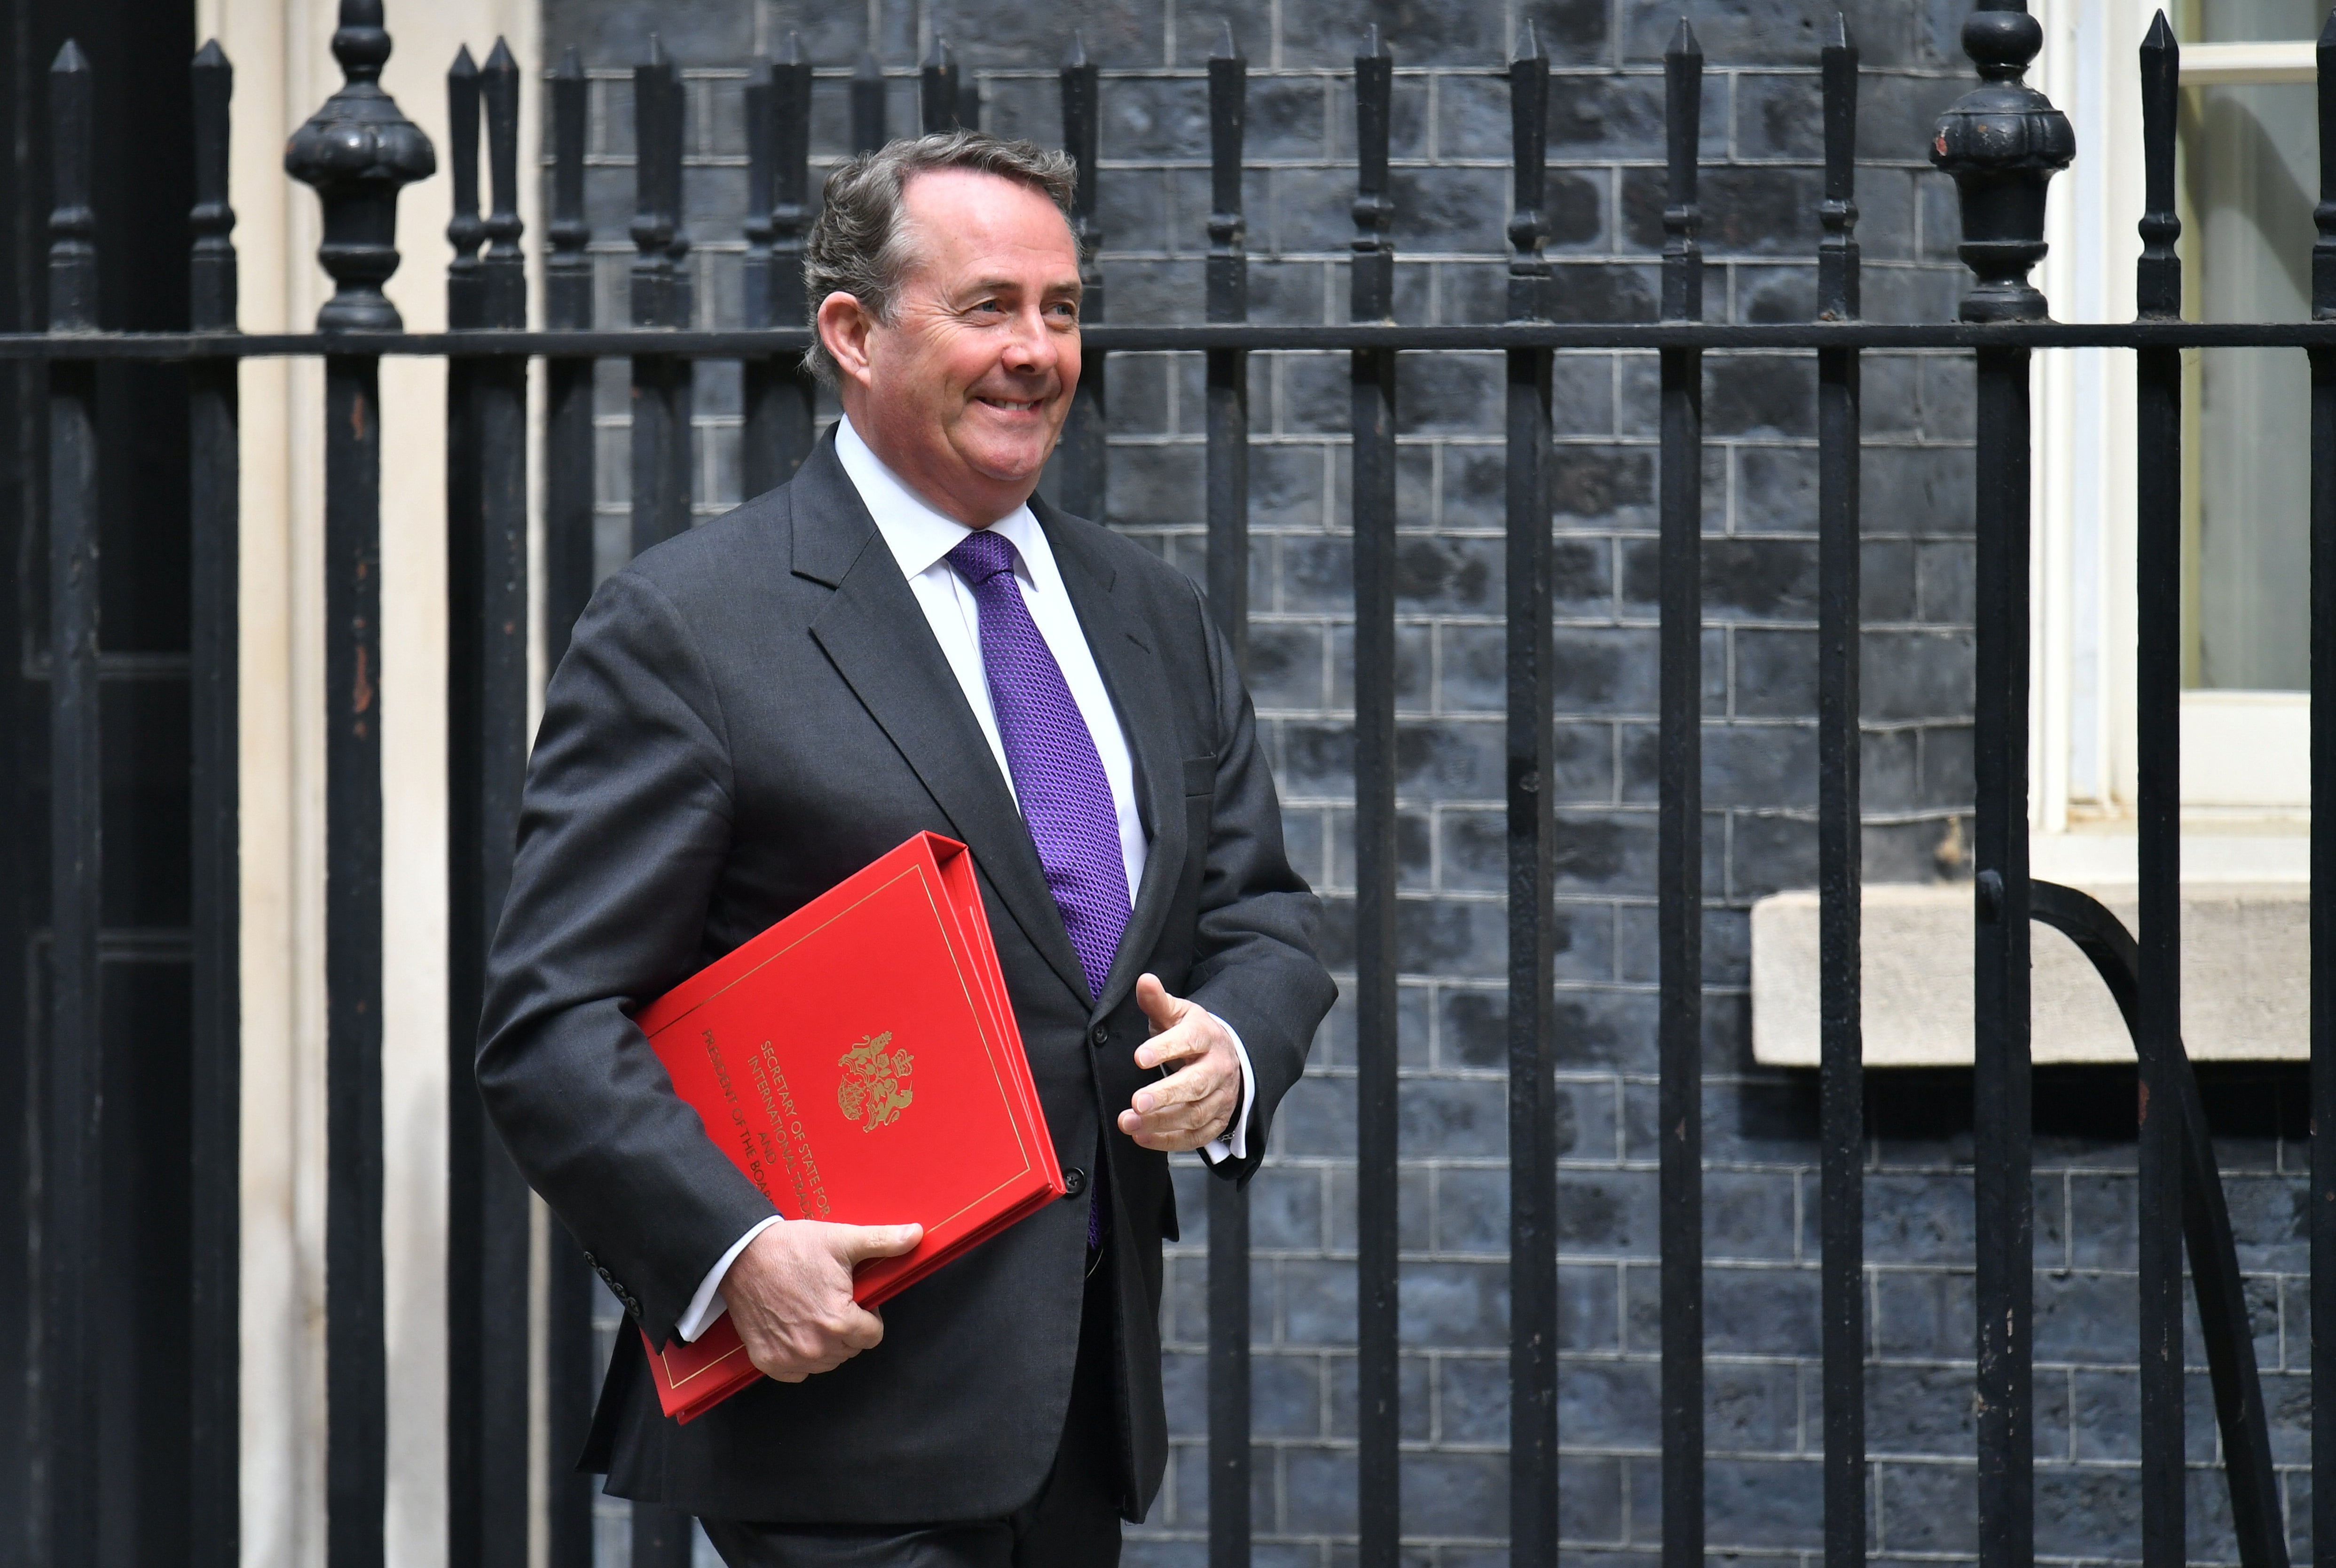 Liam Fox has yet to comment on the reports